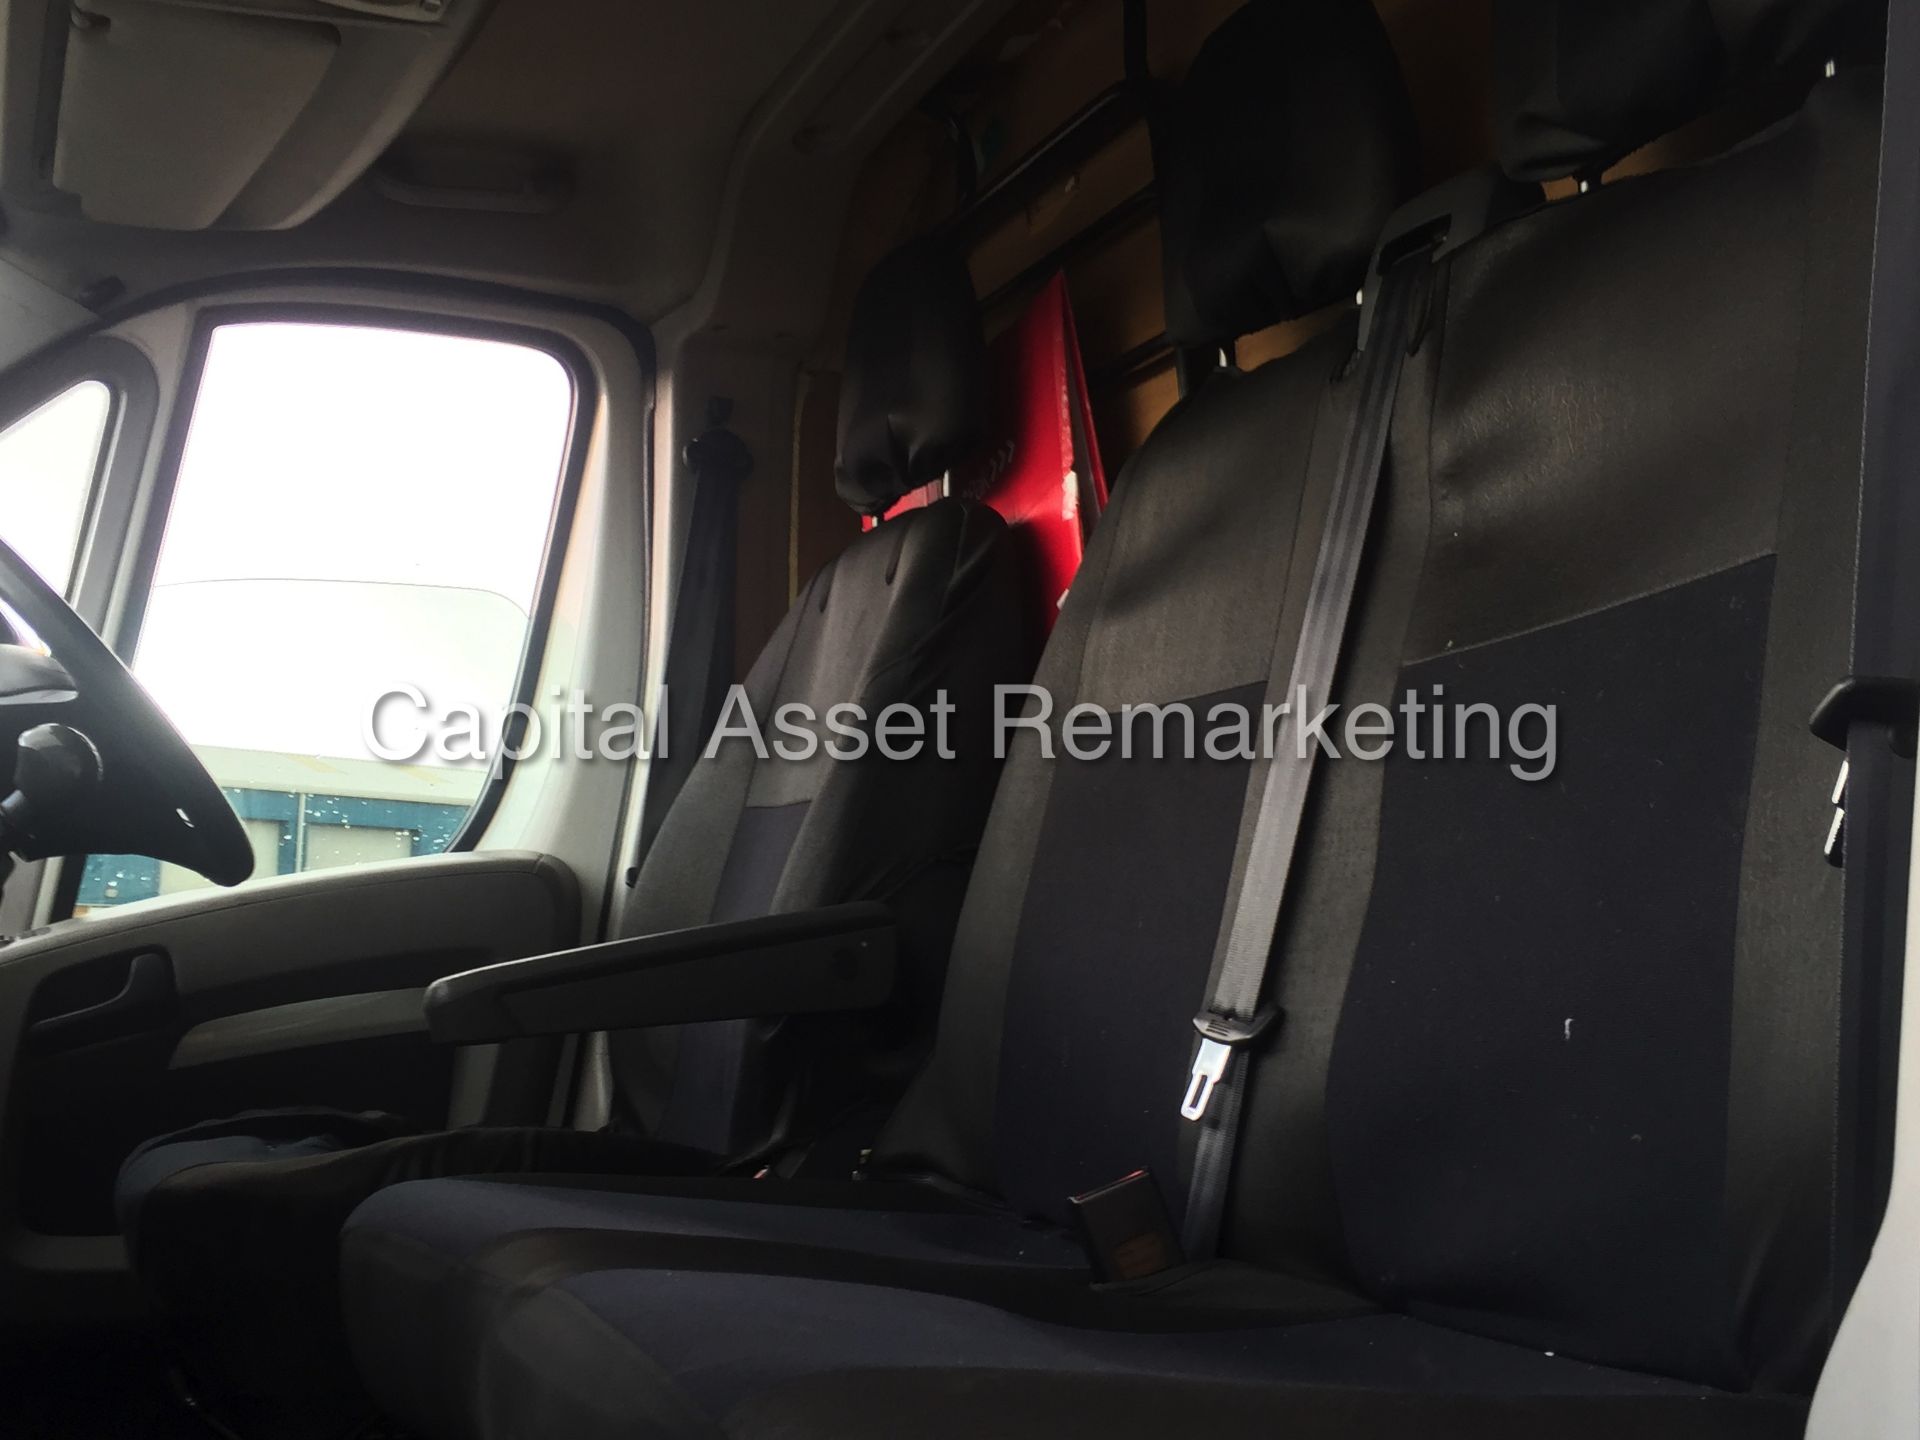 CITROEN RELAY 35 LWB HI-ROOF (2011 MODEL) 2.2 HDI - 120 PS - 6 SPEED (ELECTRIC PACK) - Image 16 of 19